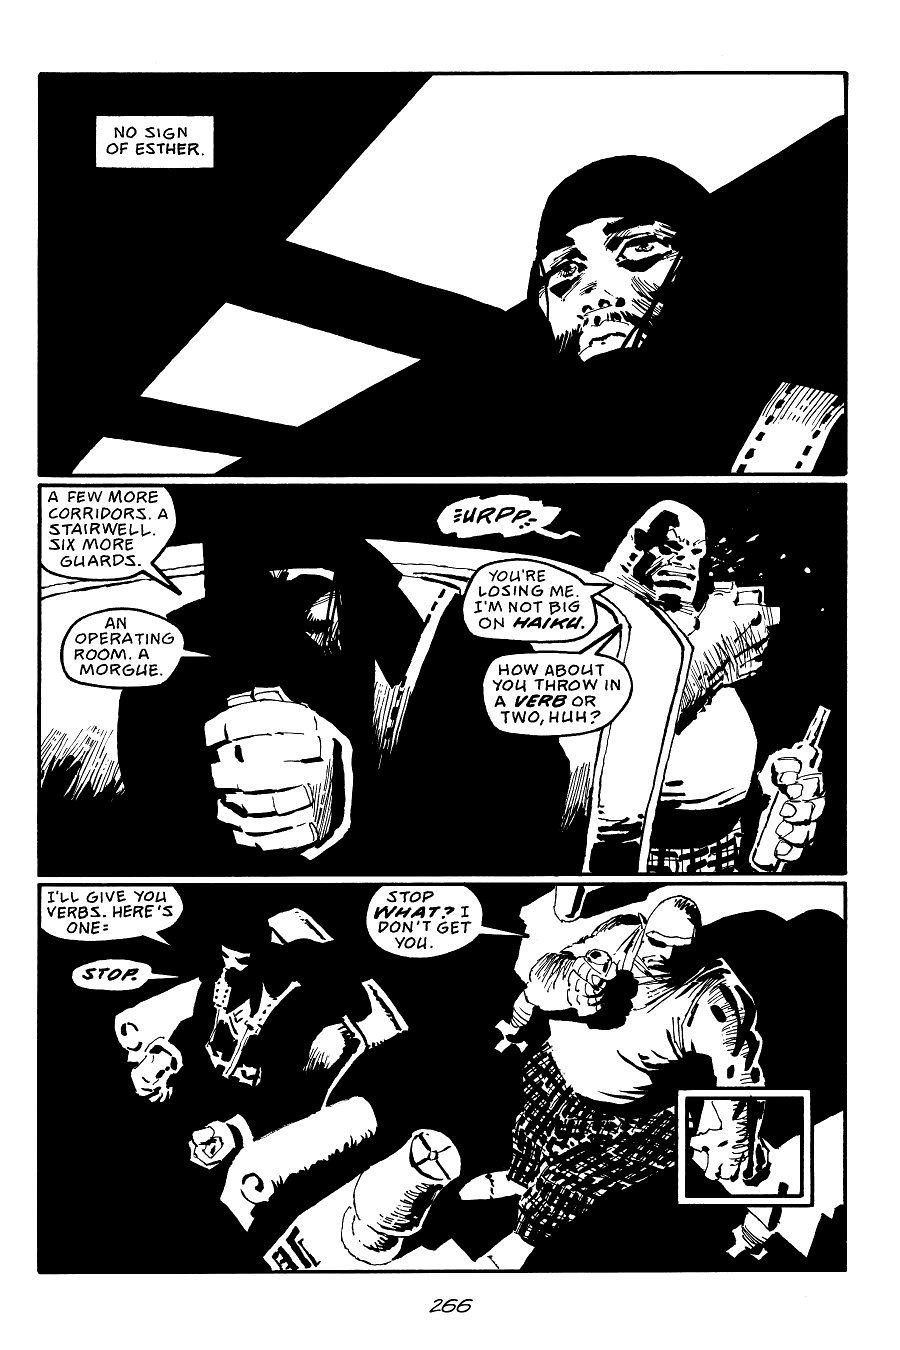 page 266 of sin city 7 hell and back